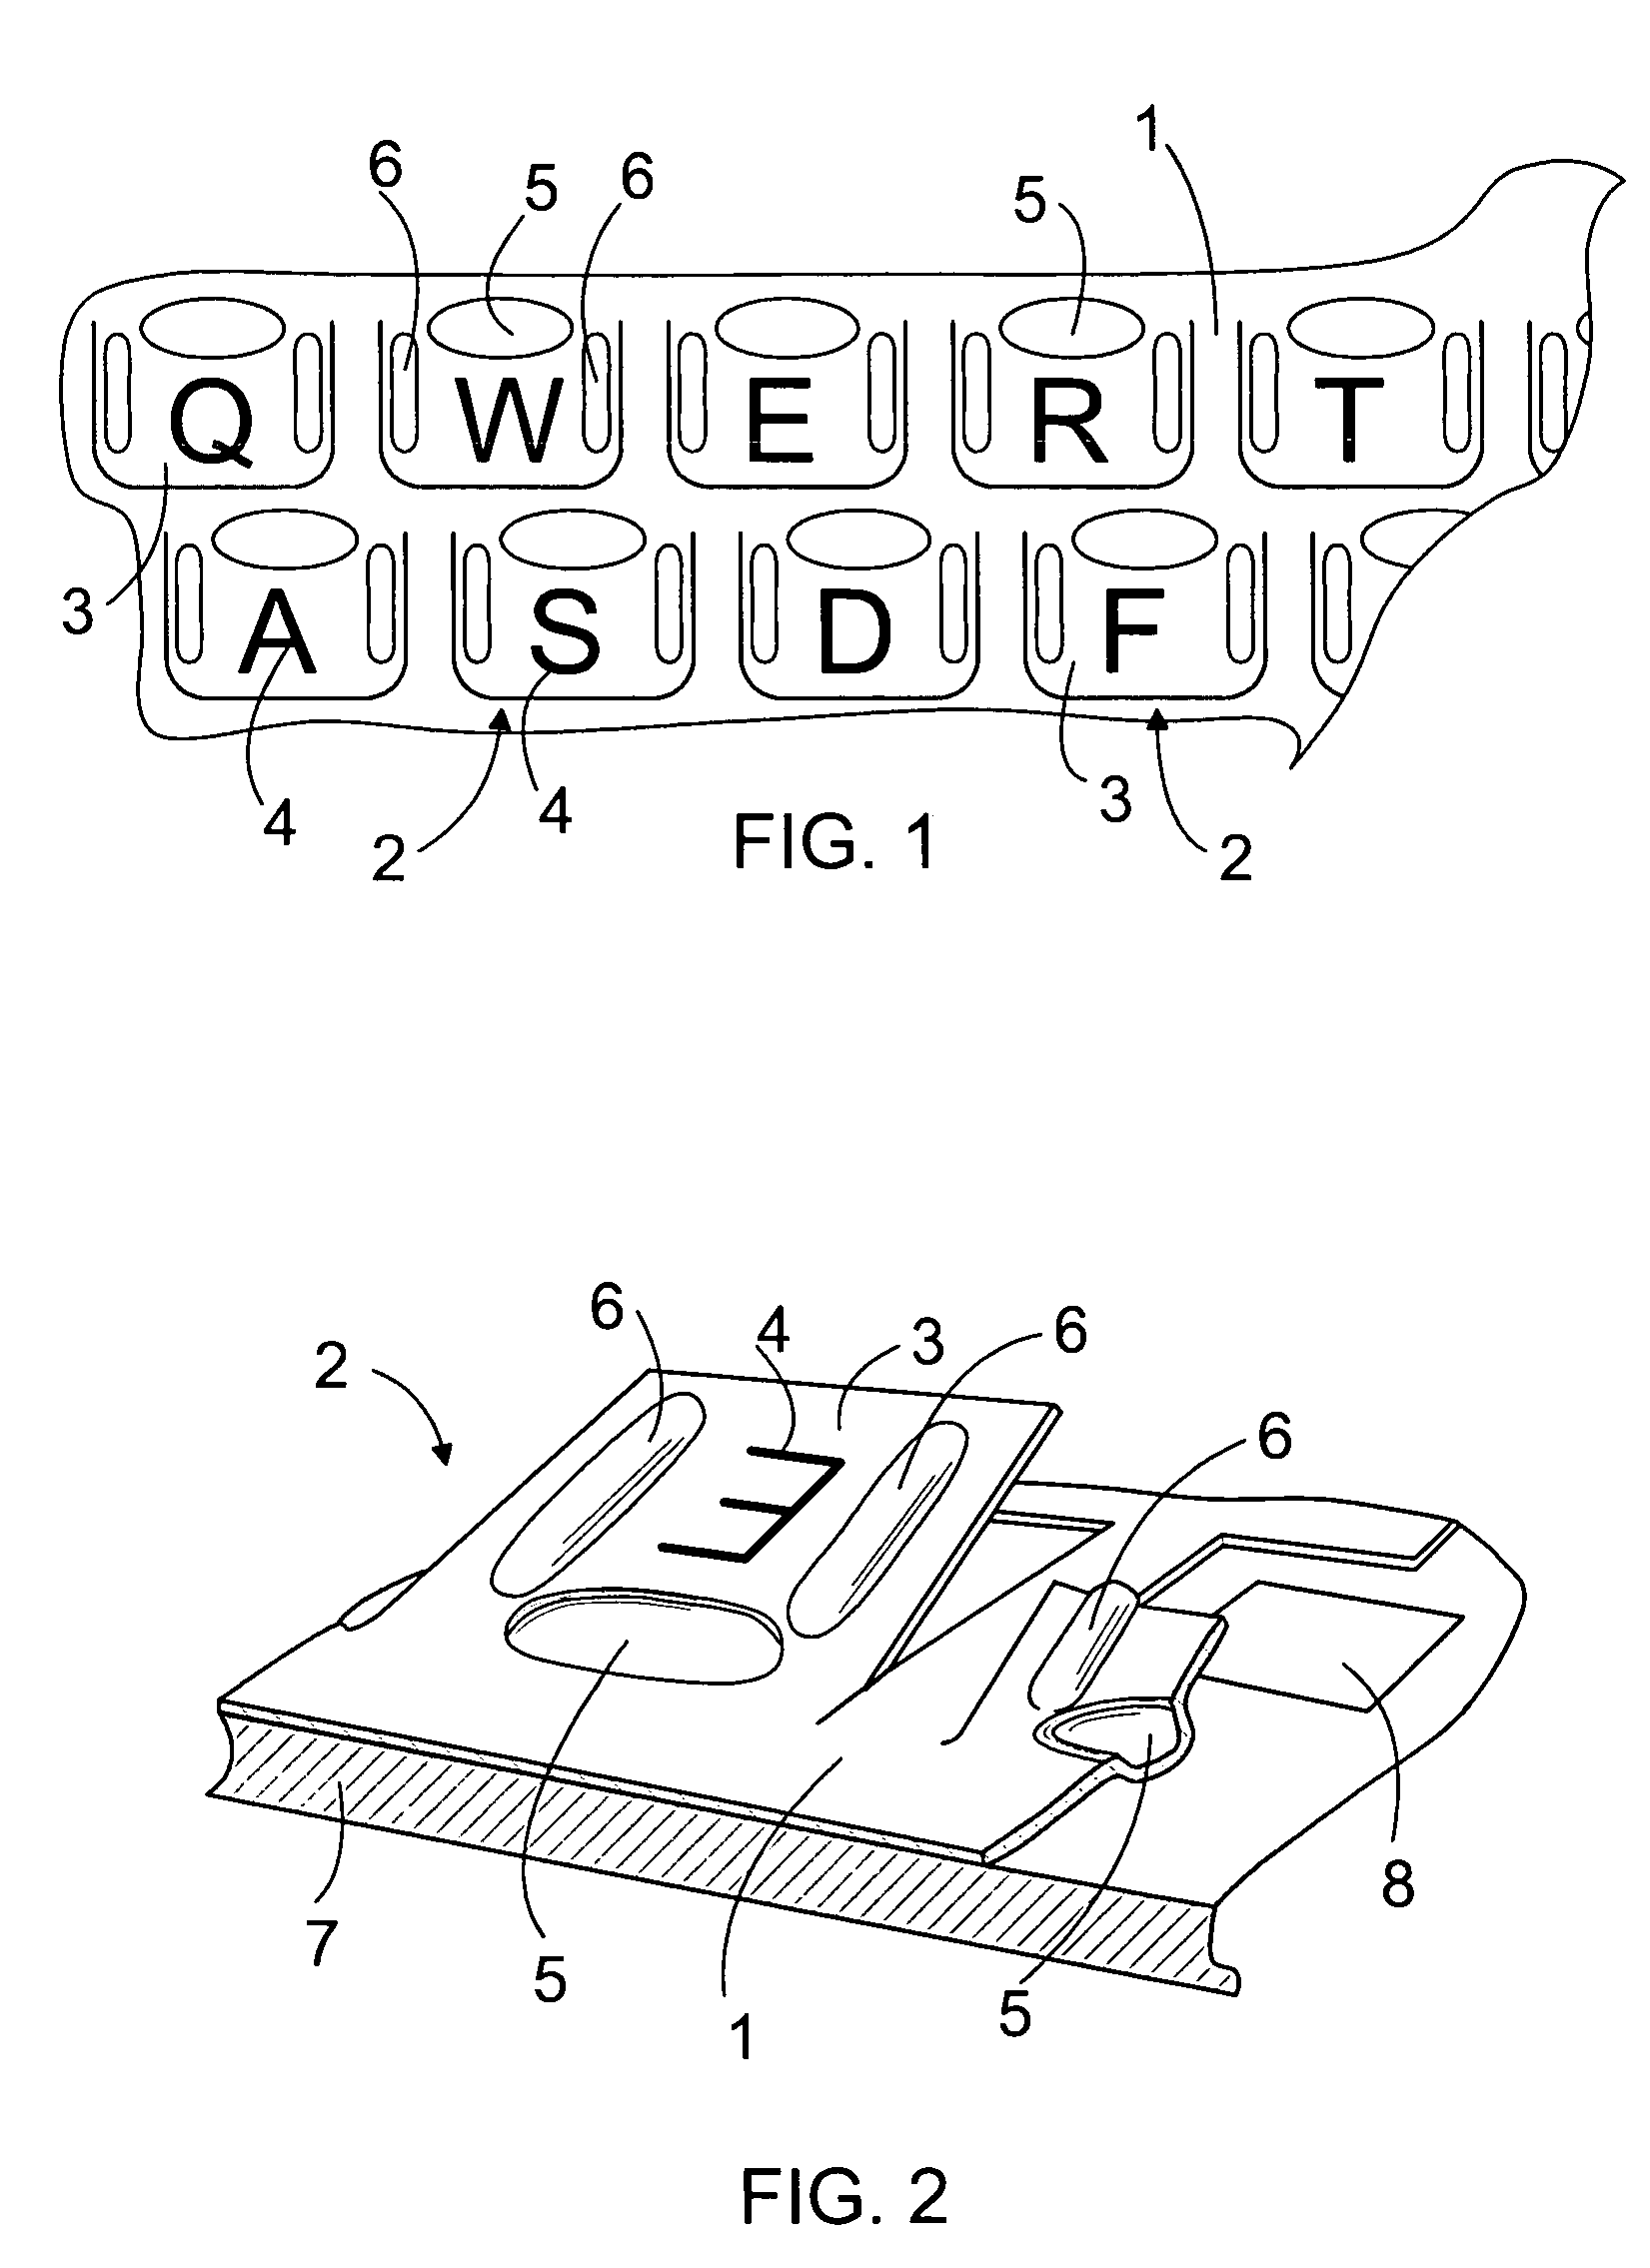 Keyboard and a method for manufacturing it